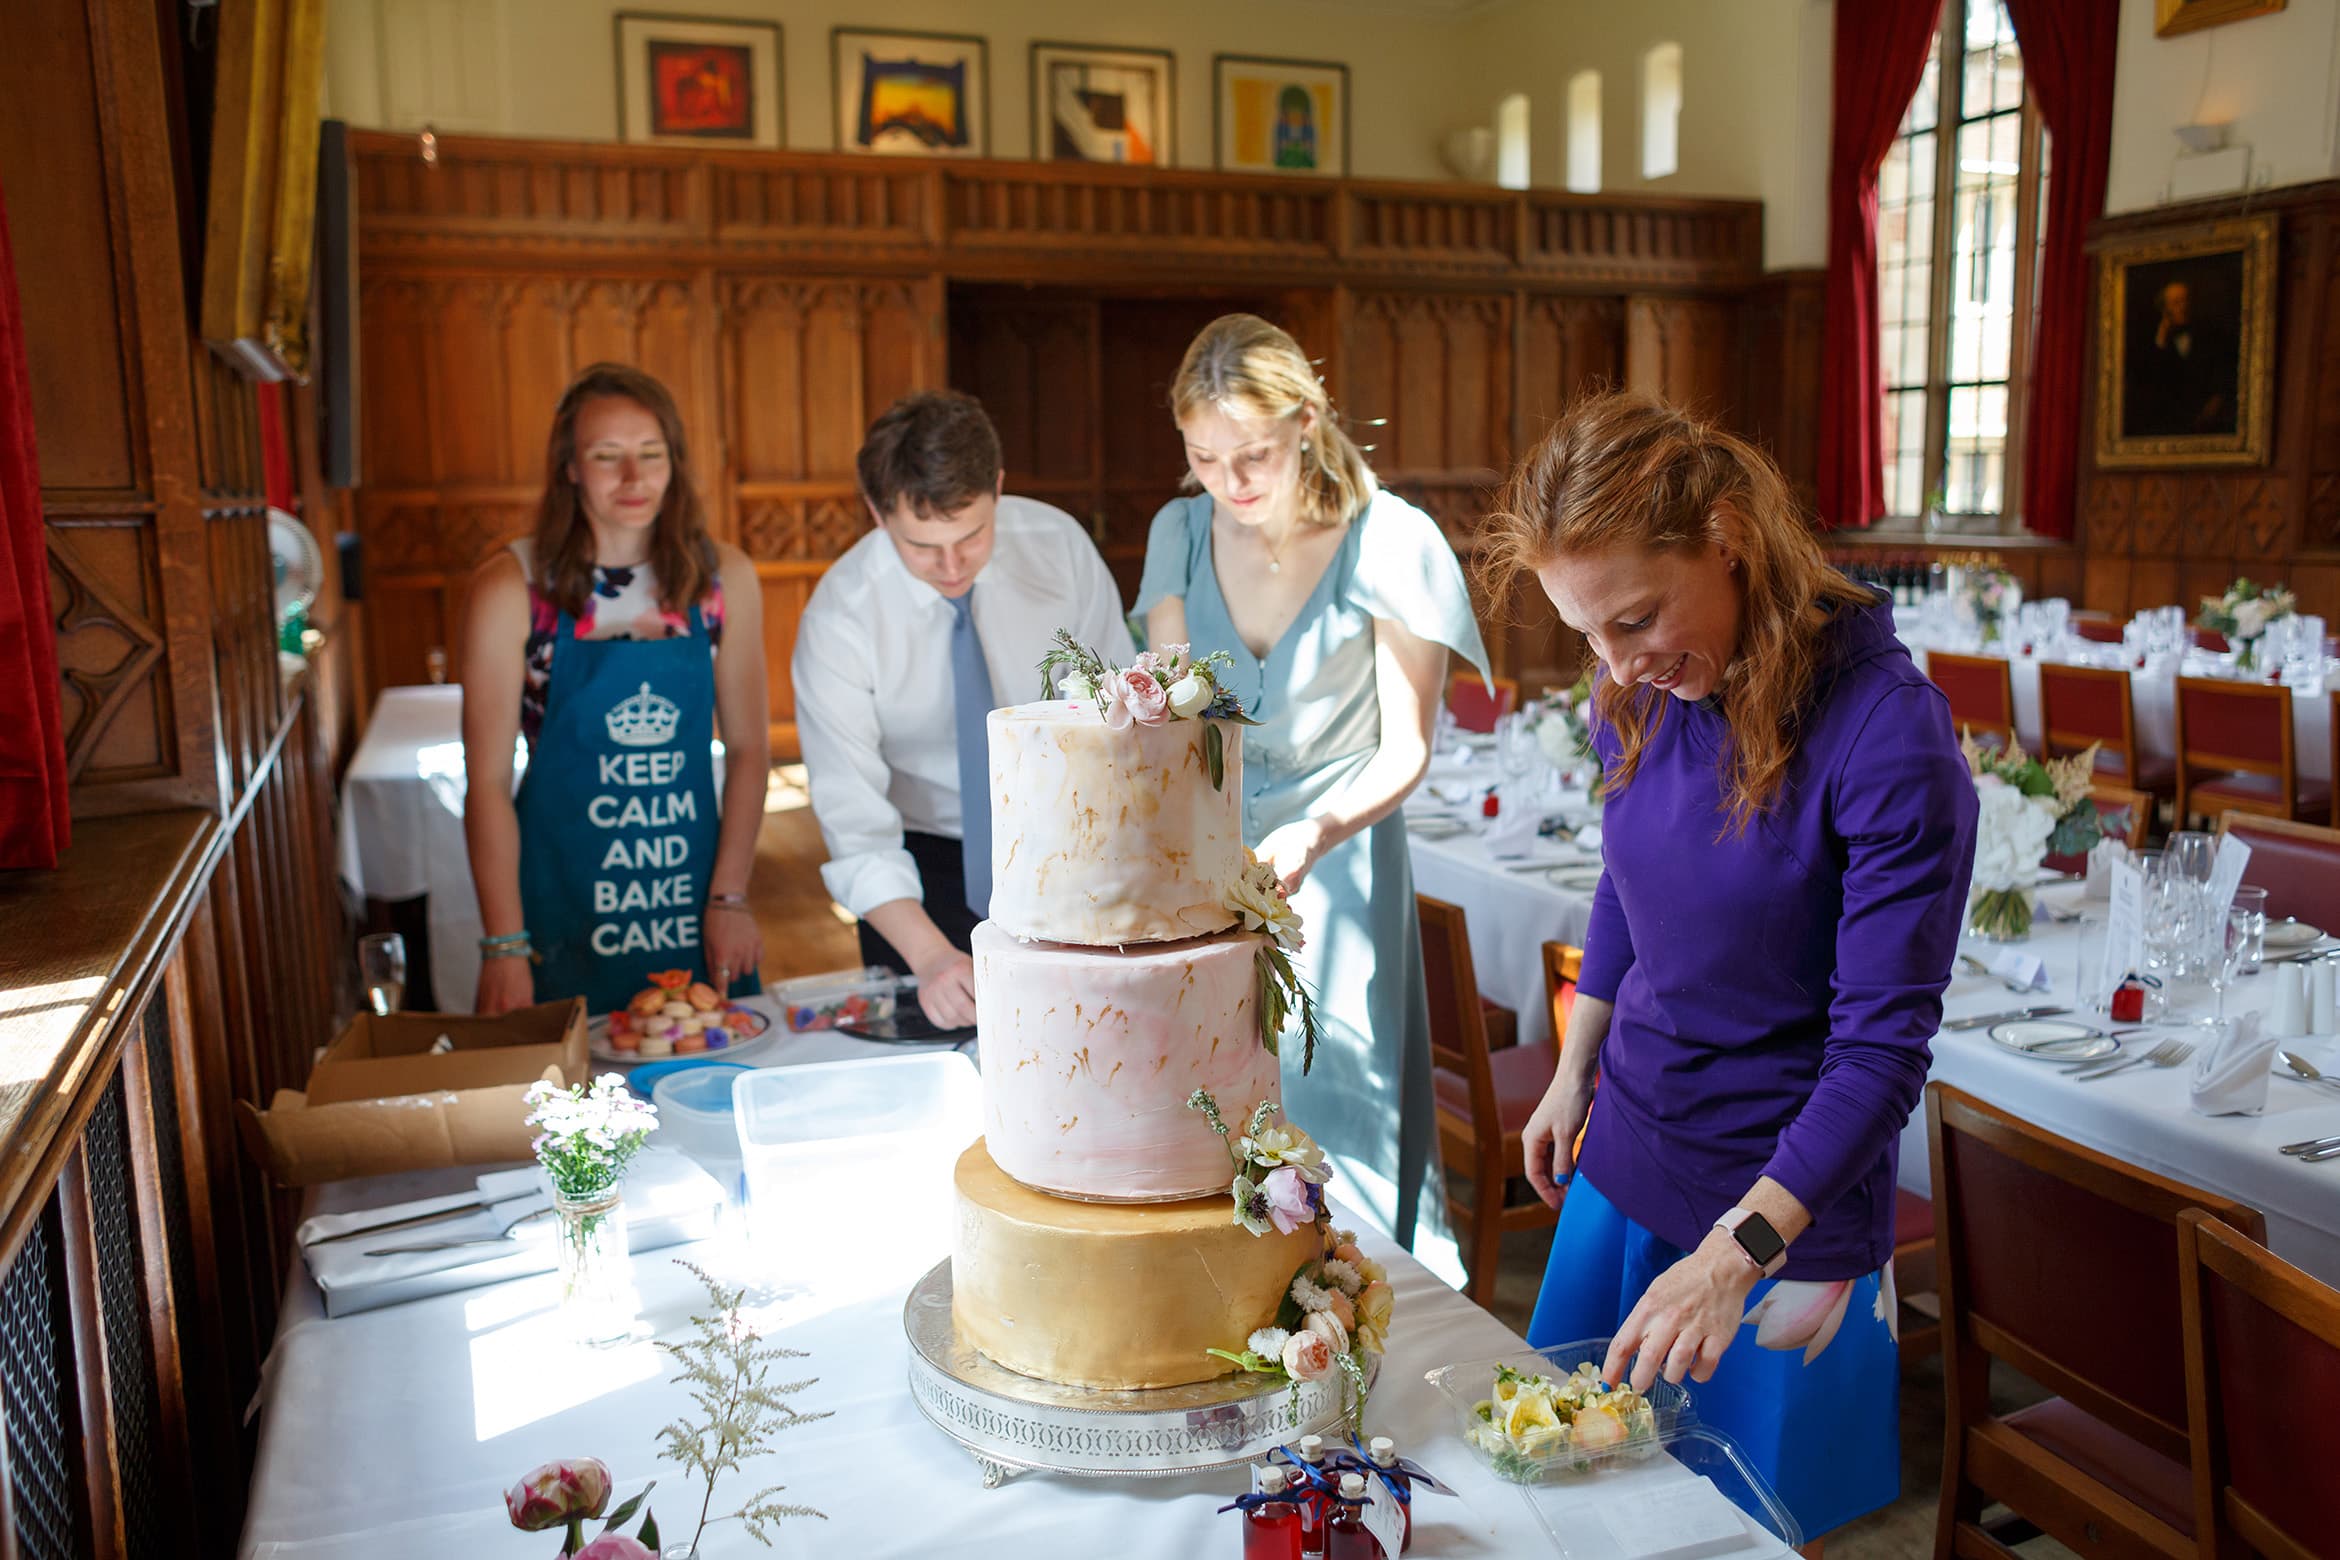 a friend applies the finishing touches to the wedding cake